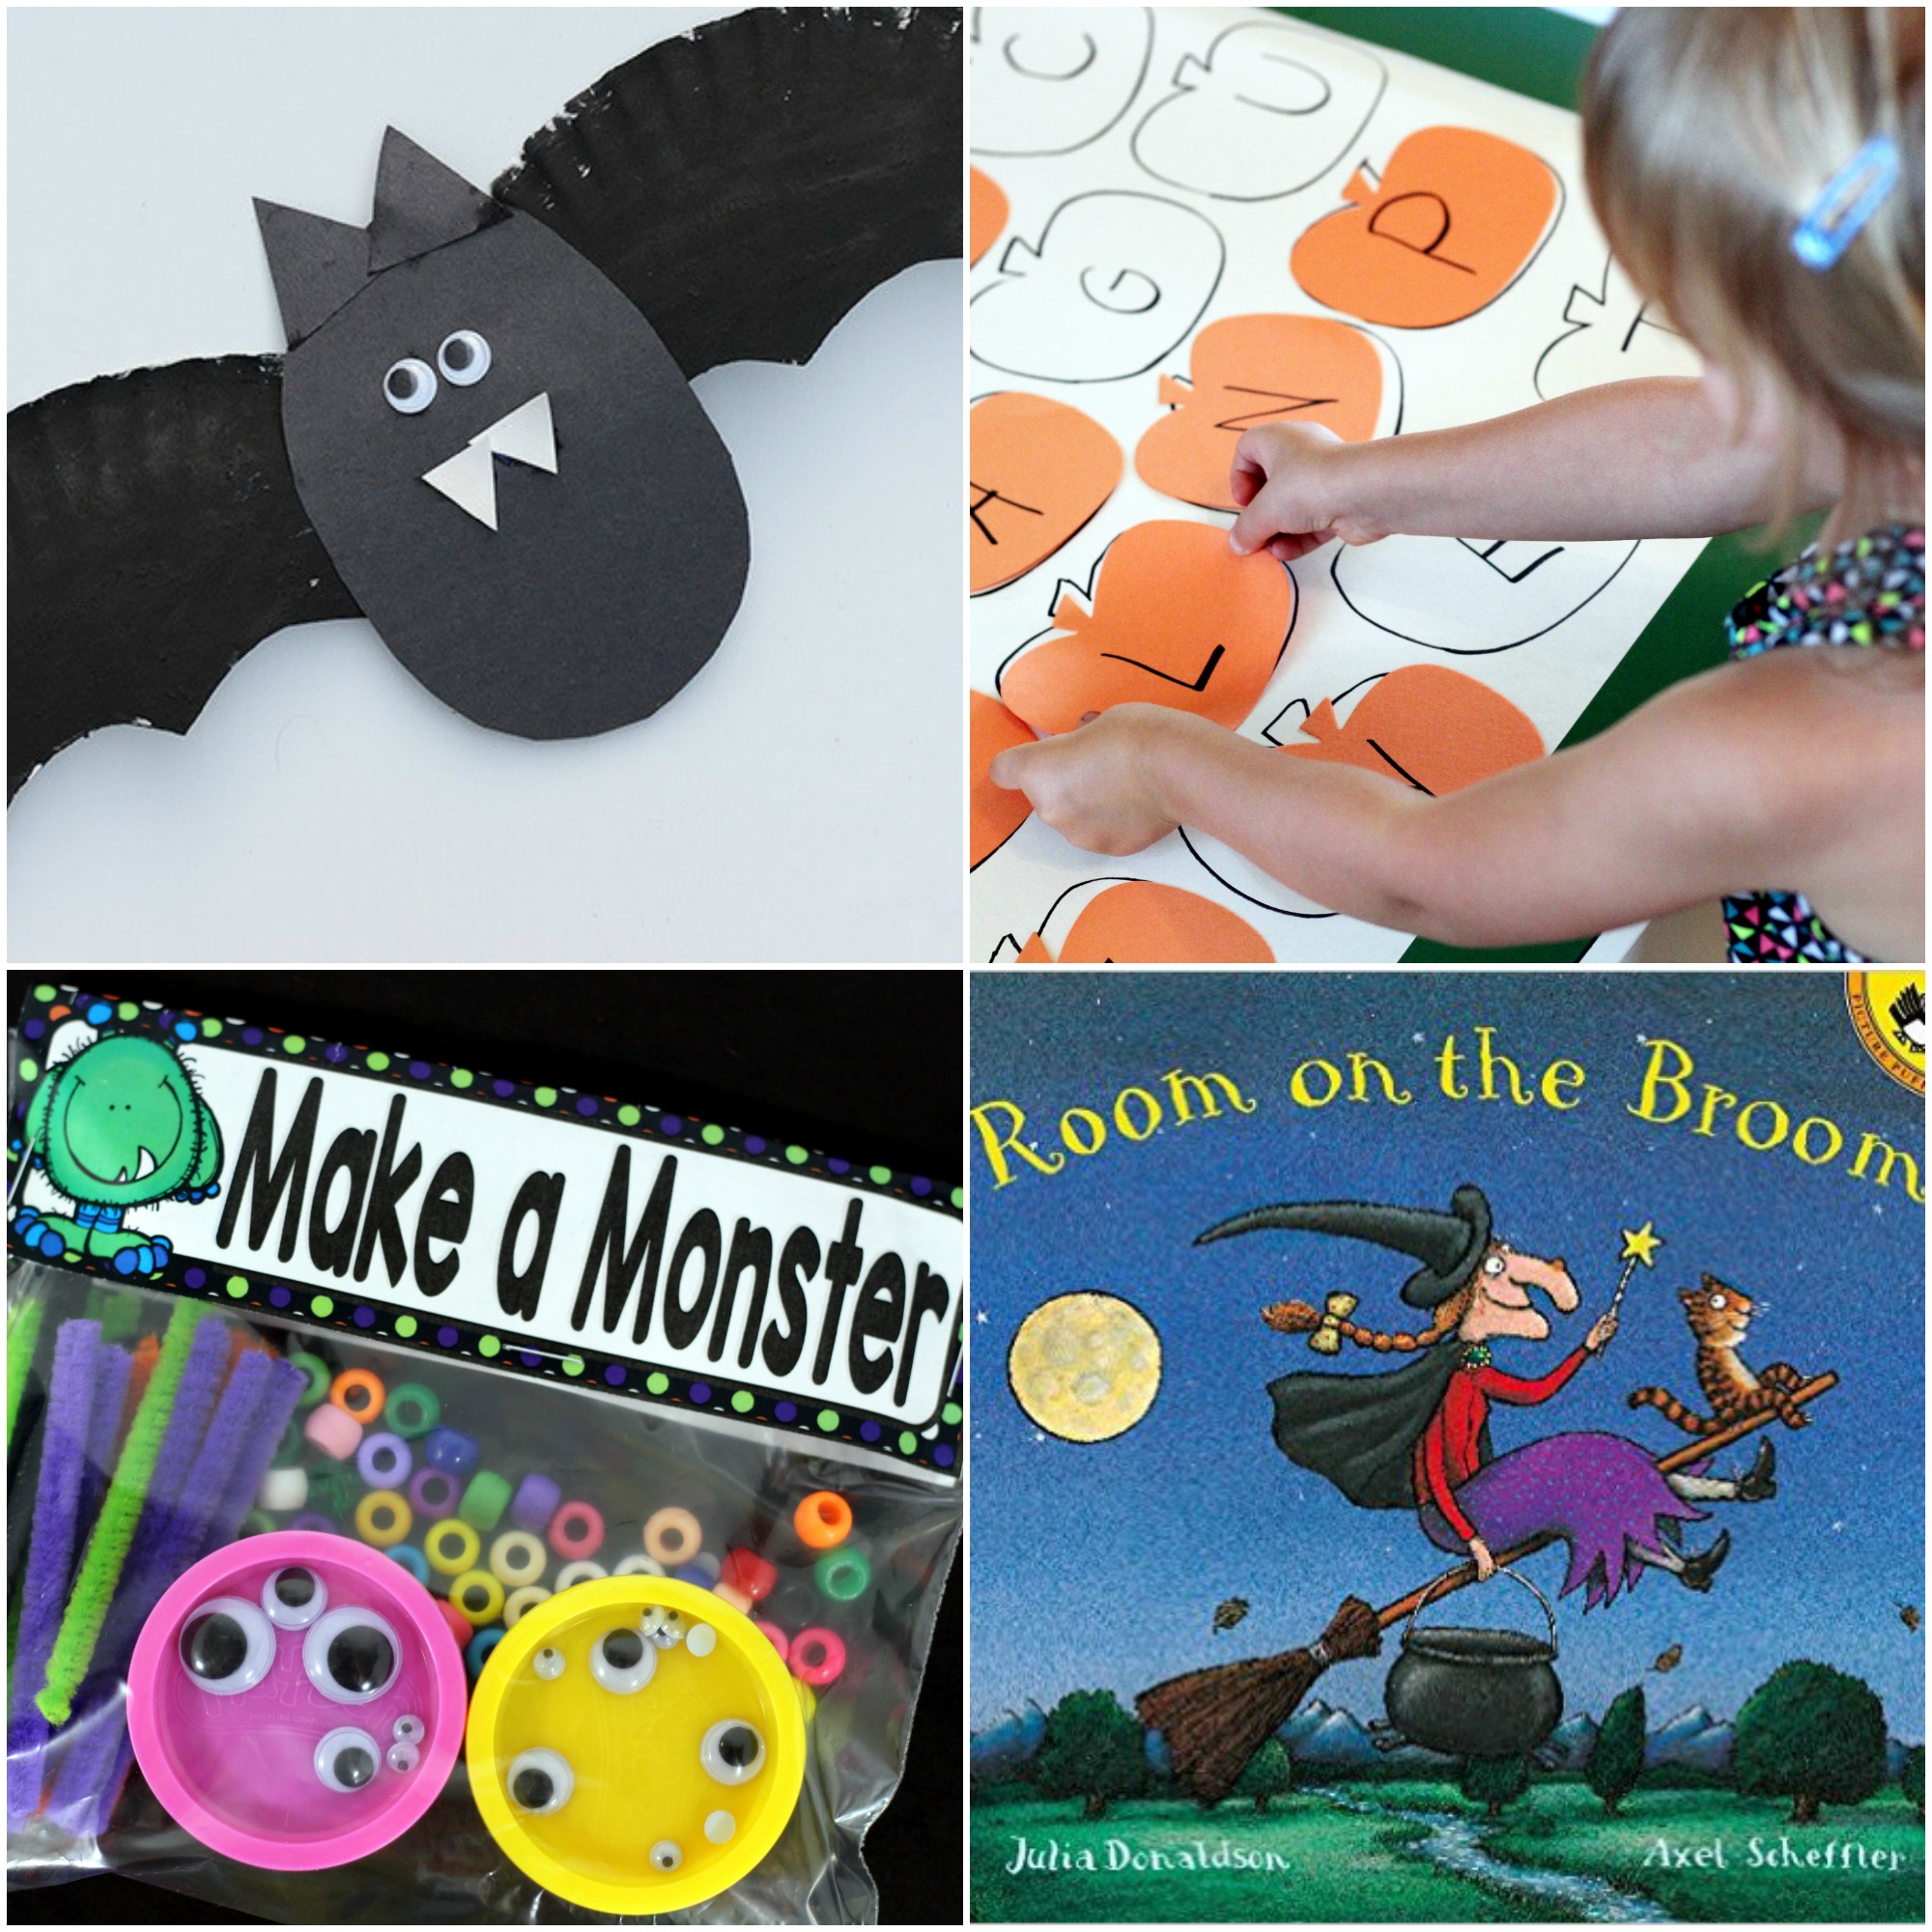 It's the time of year where students are OVERJOYED at all the candy and festivities that surround Halloween. While they are excited, slip in some halloween learning activities for little learners!